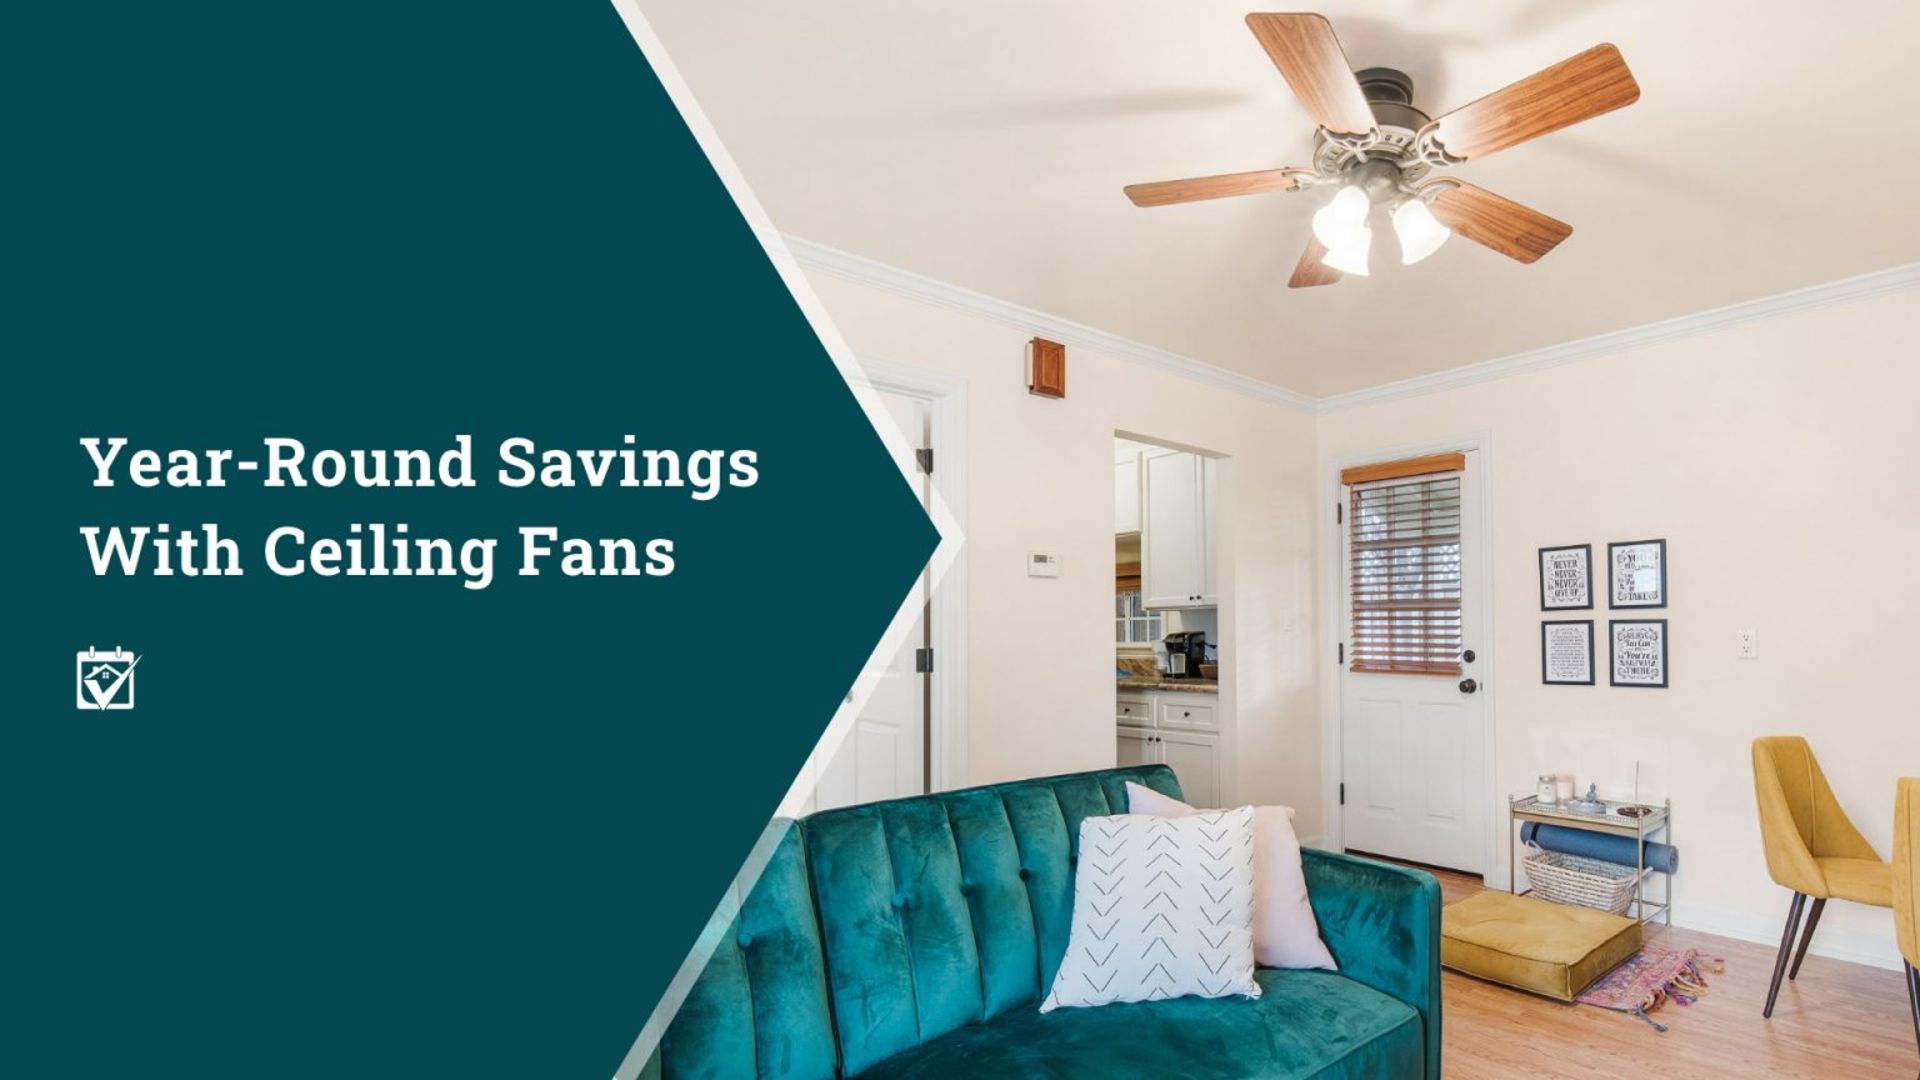 Year-Round Savings With Ceiling Fans